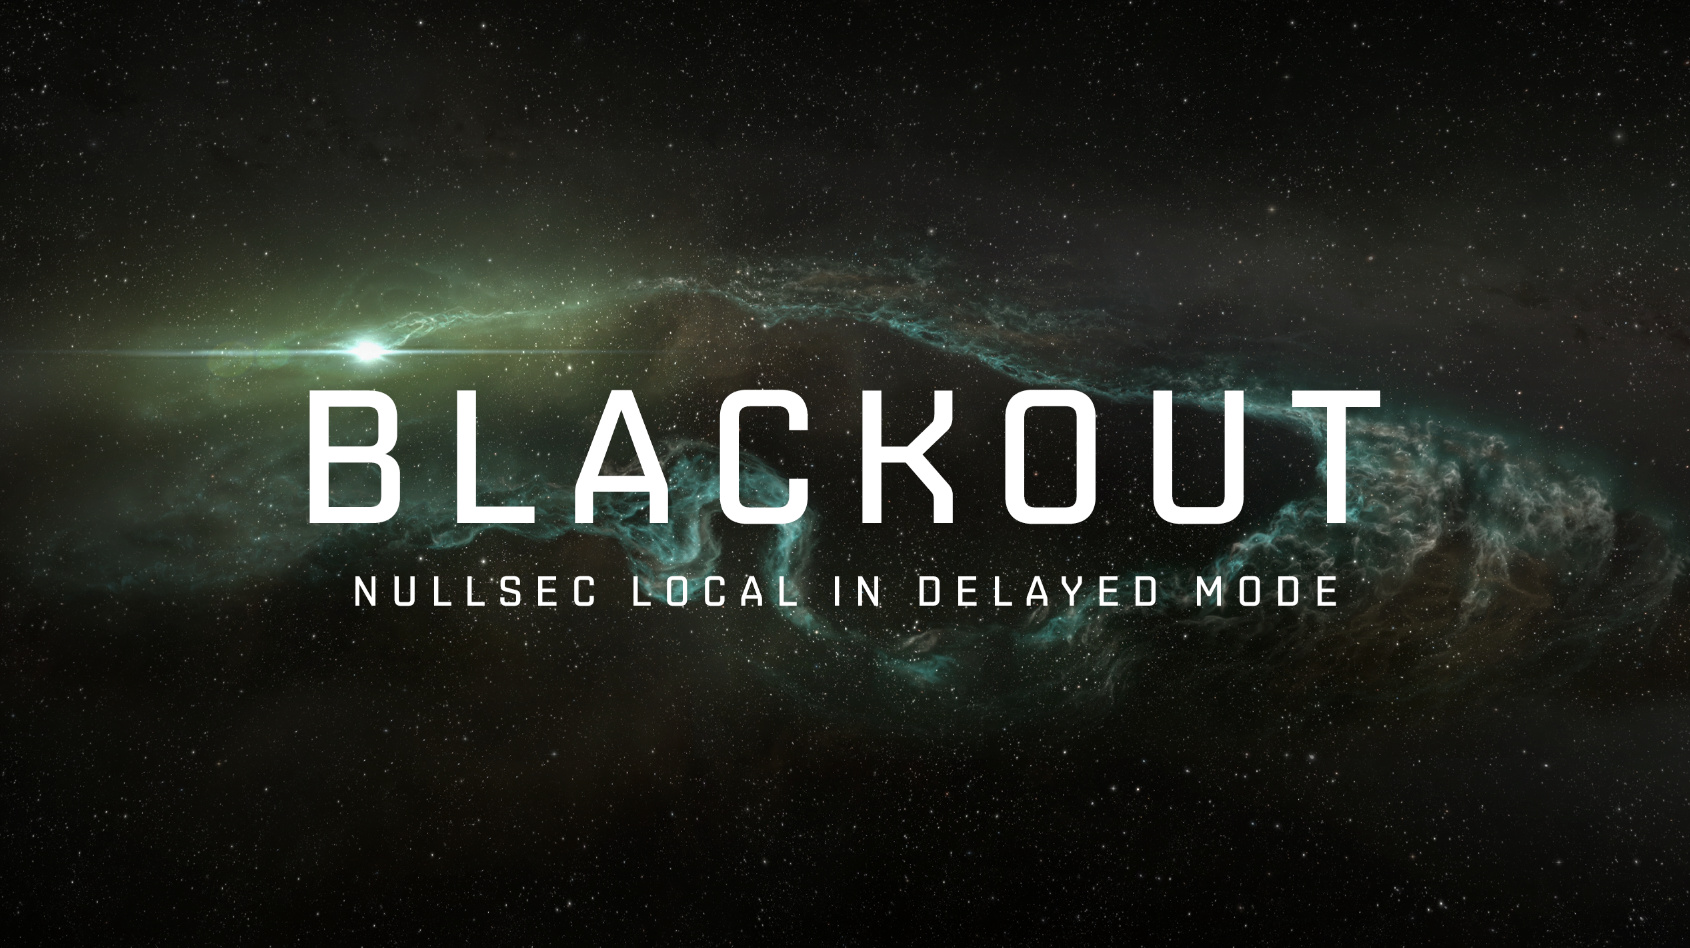 NULLSEC LOCAL BLACKOUT INCOMING DURING JULY!   by くるみさん 1690 x 948